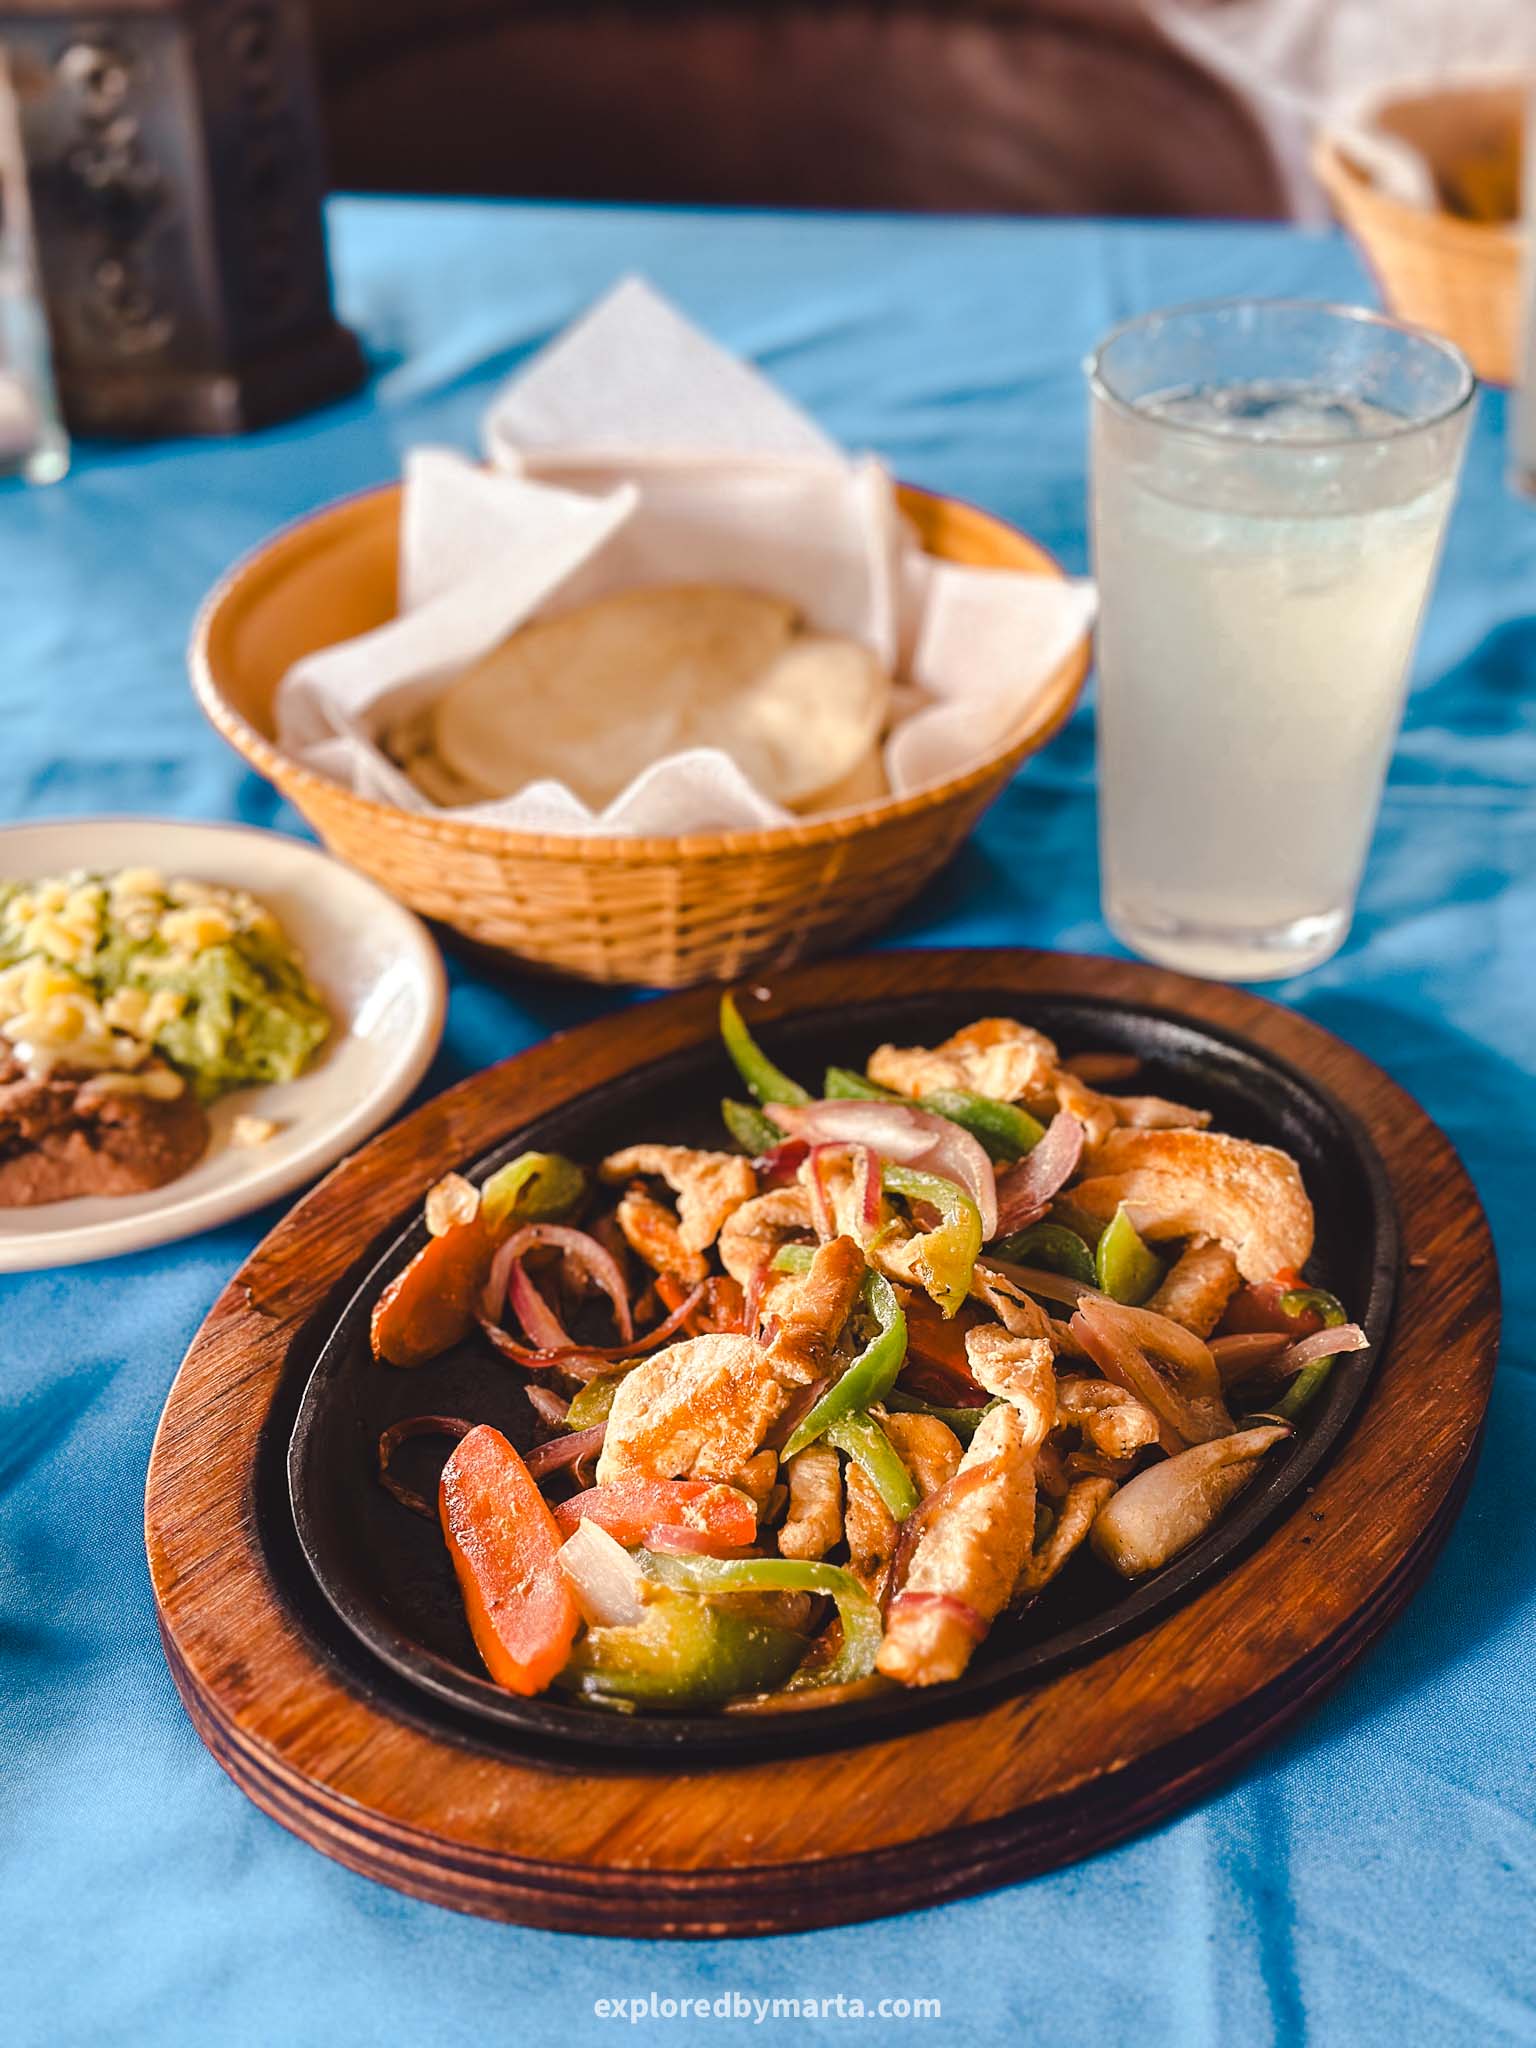 Mexican food in Cozumel, Mexico - Pancho's Backyard